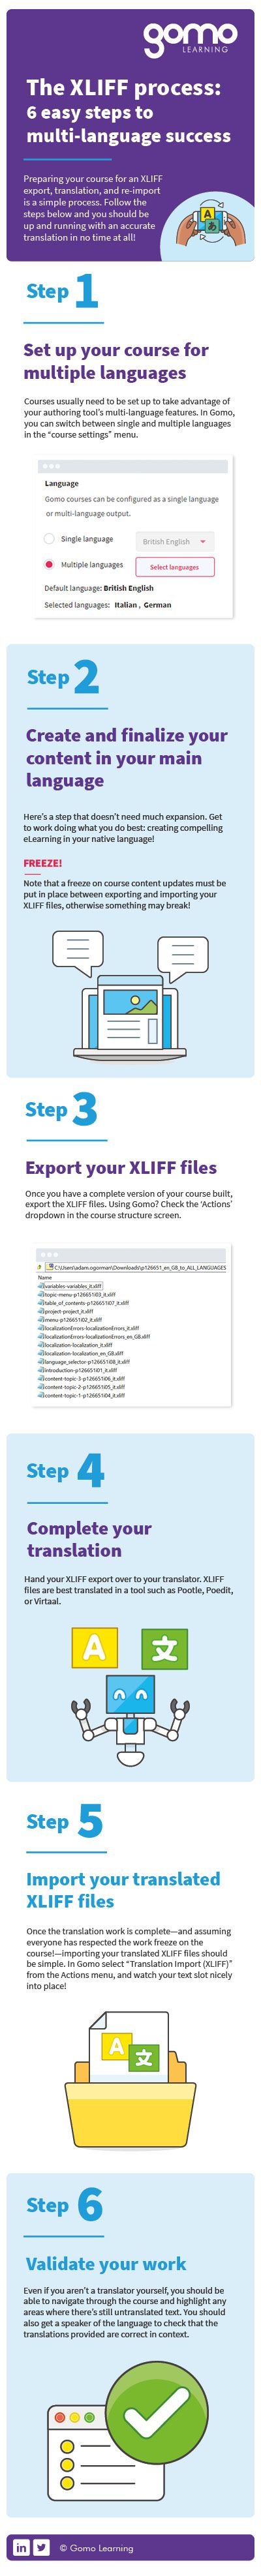 Mobile-sized XLIFF Process infographic: see PDF download for machine readable version.